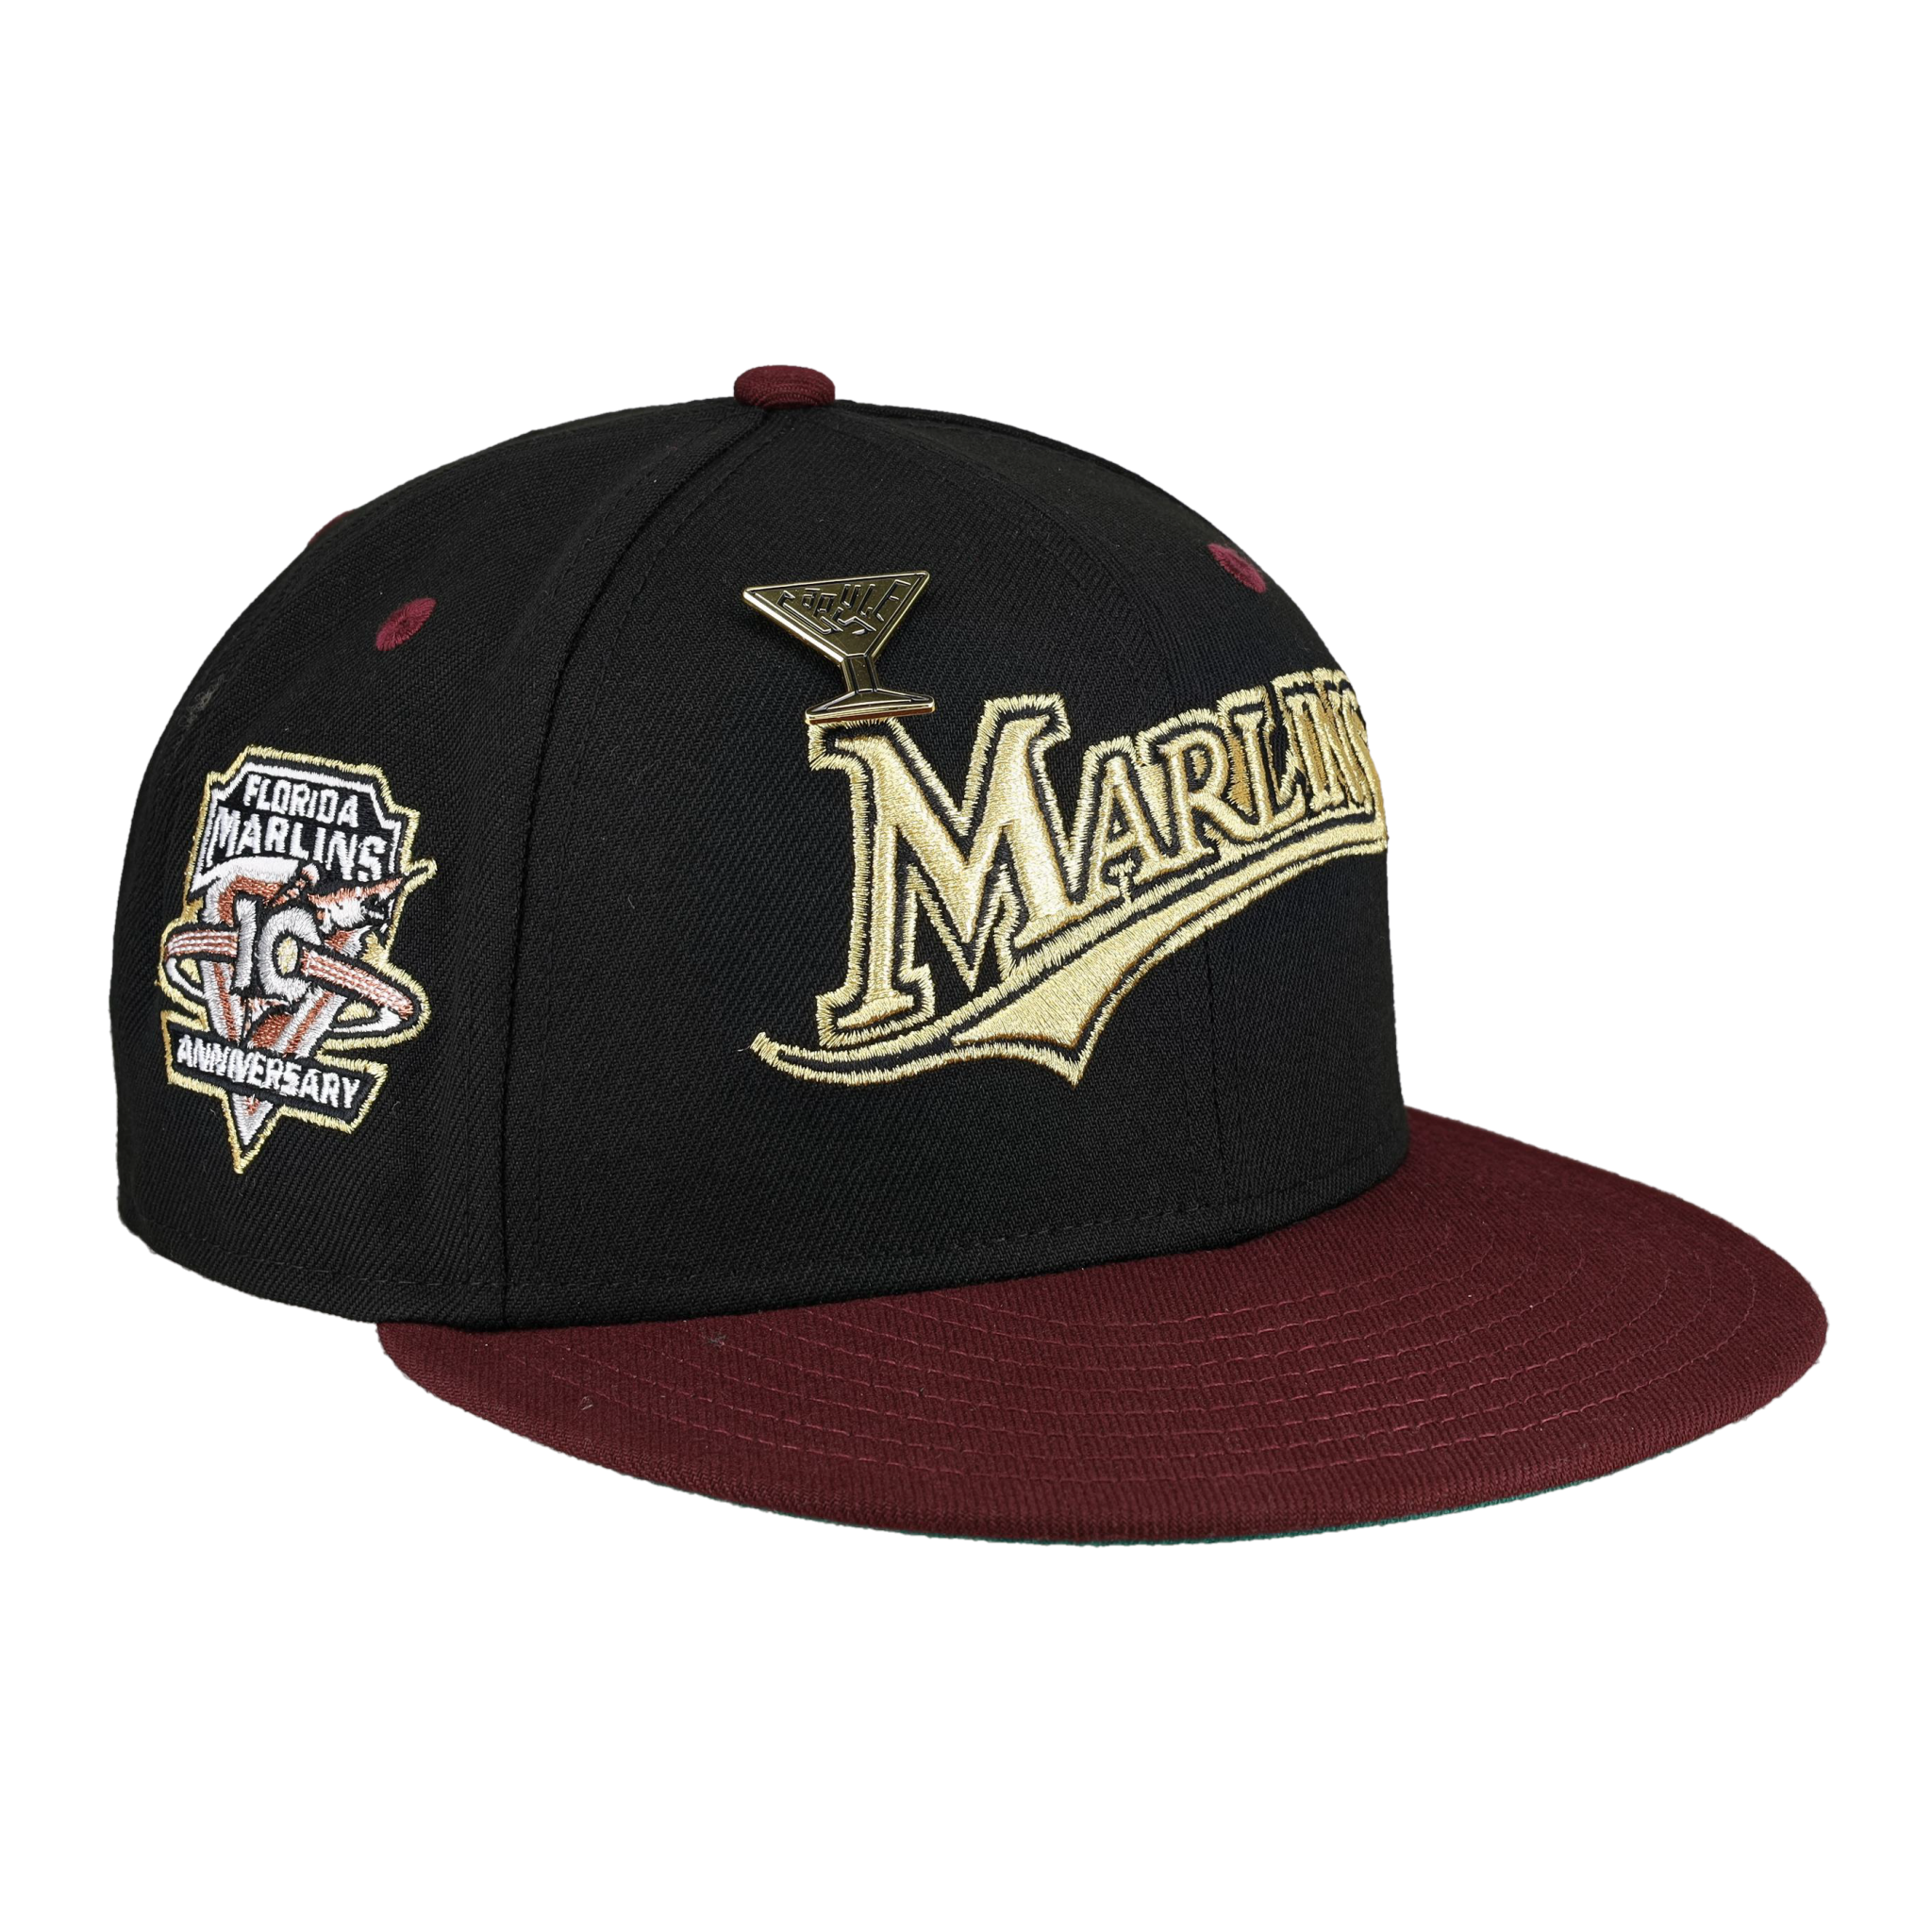 Florida Marlins Upper Class Collection 10th Anniversary Fitted Hat 7